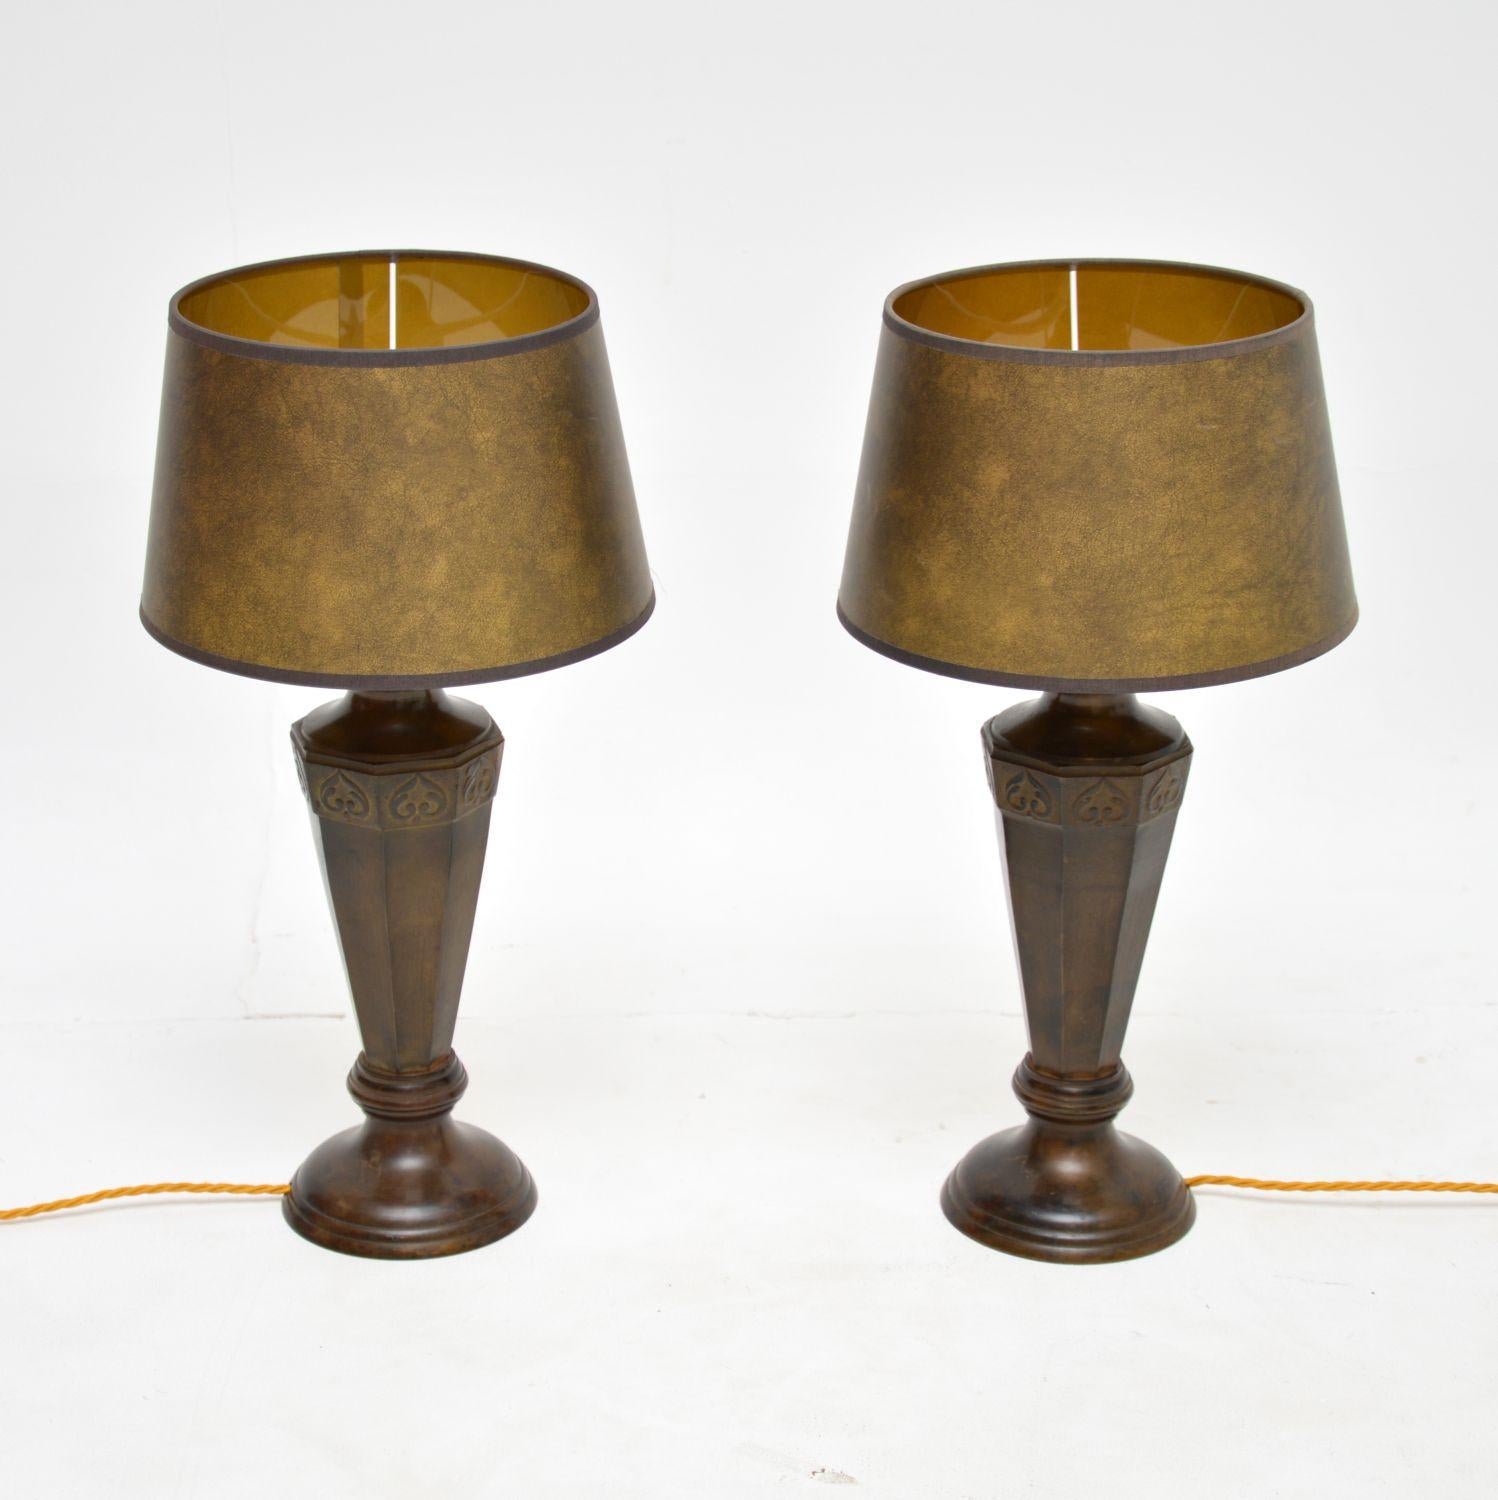 A fantastic pair of vintage table lamps in solid bronze. They are in the antique neoclassical style, and they probably date from around the 1950’s.

The quality is outstanding, they are a lovely size and come with the original shades that compliment